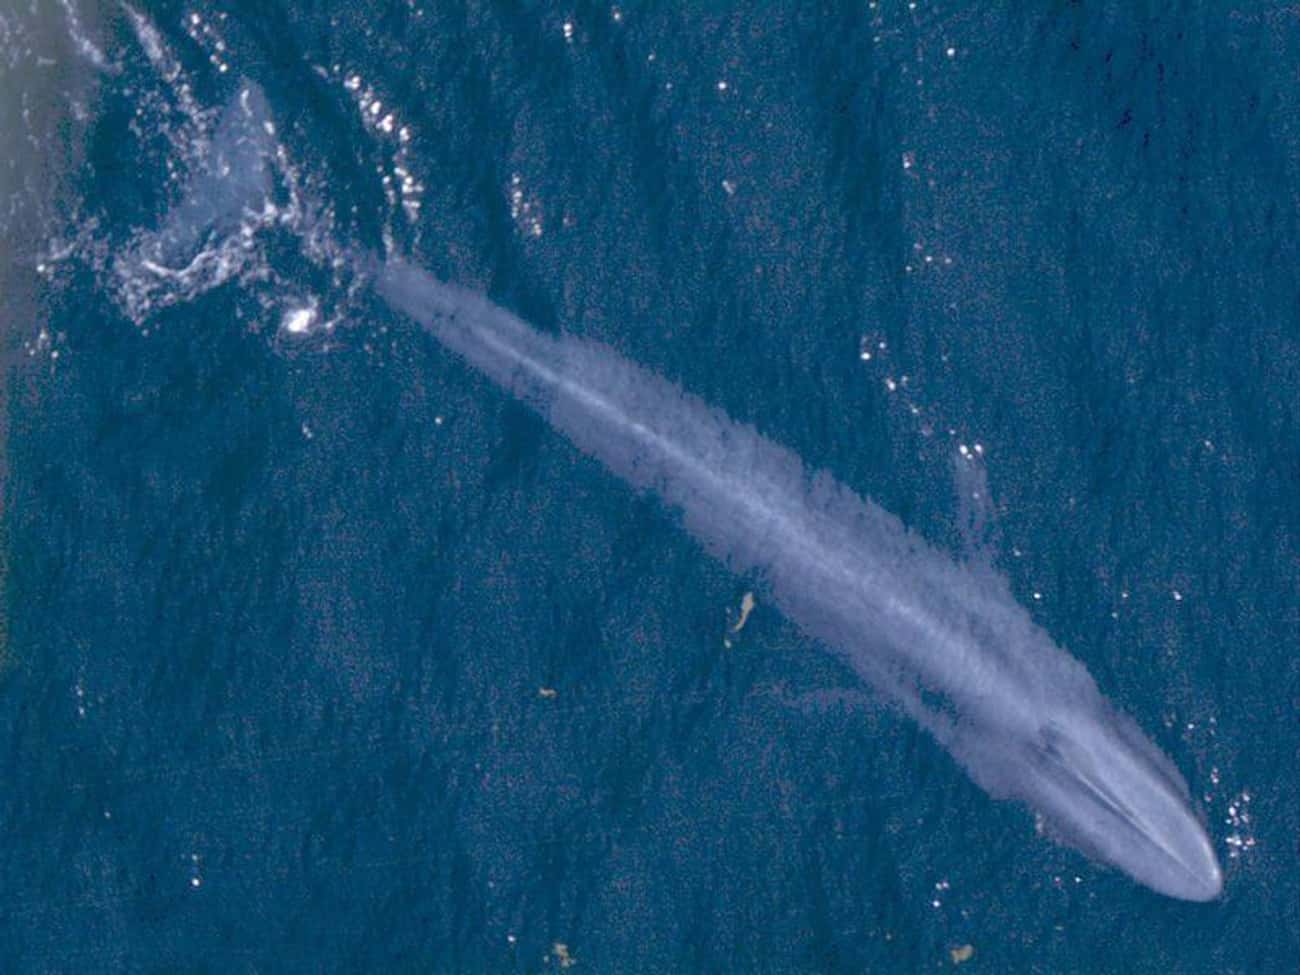 'The World's Loneliest Whale' Vocalizes At Its Own Frequency